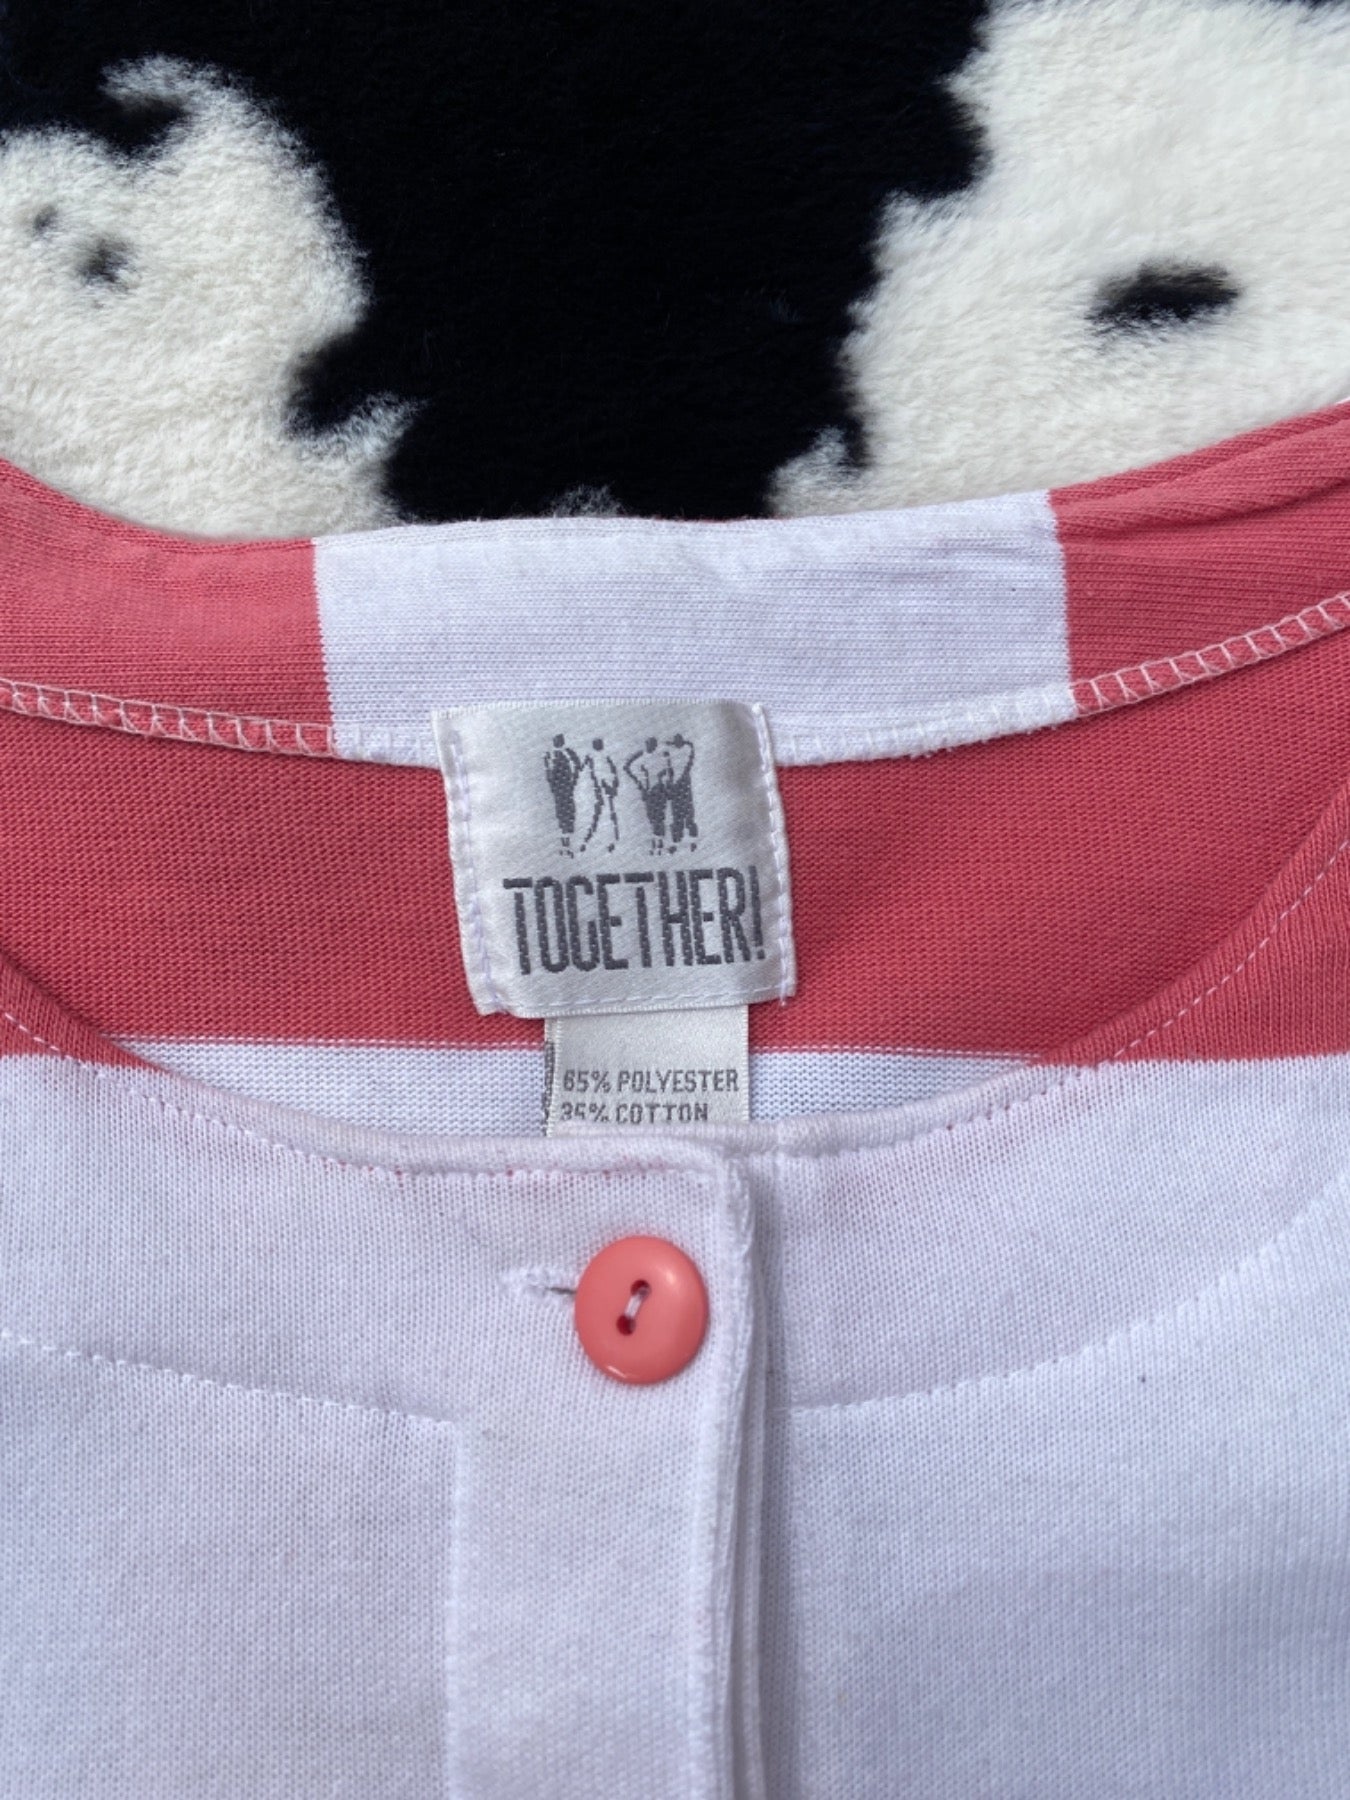 TOGETHER! PINK & WHITE STRIPED TEE